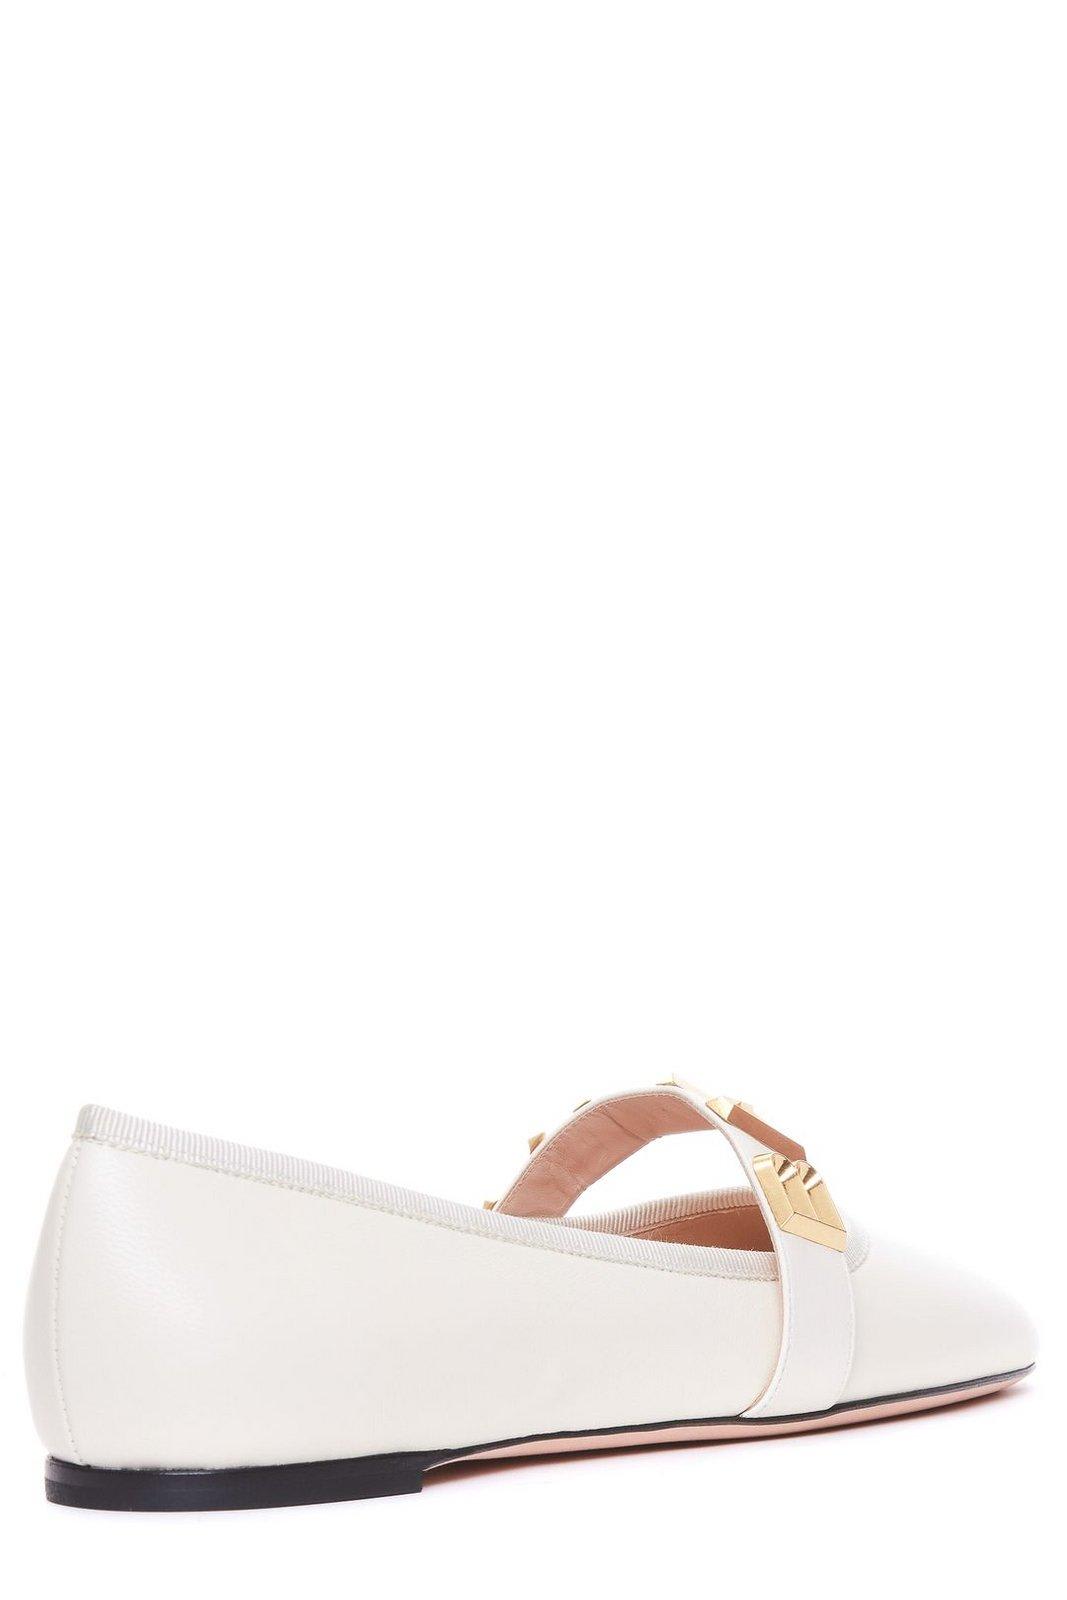 Shop Bally Balby Squared Toe Ballet Flats In White